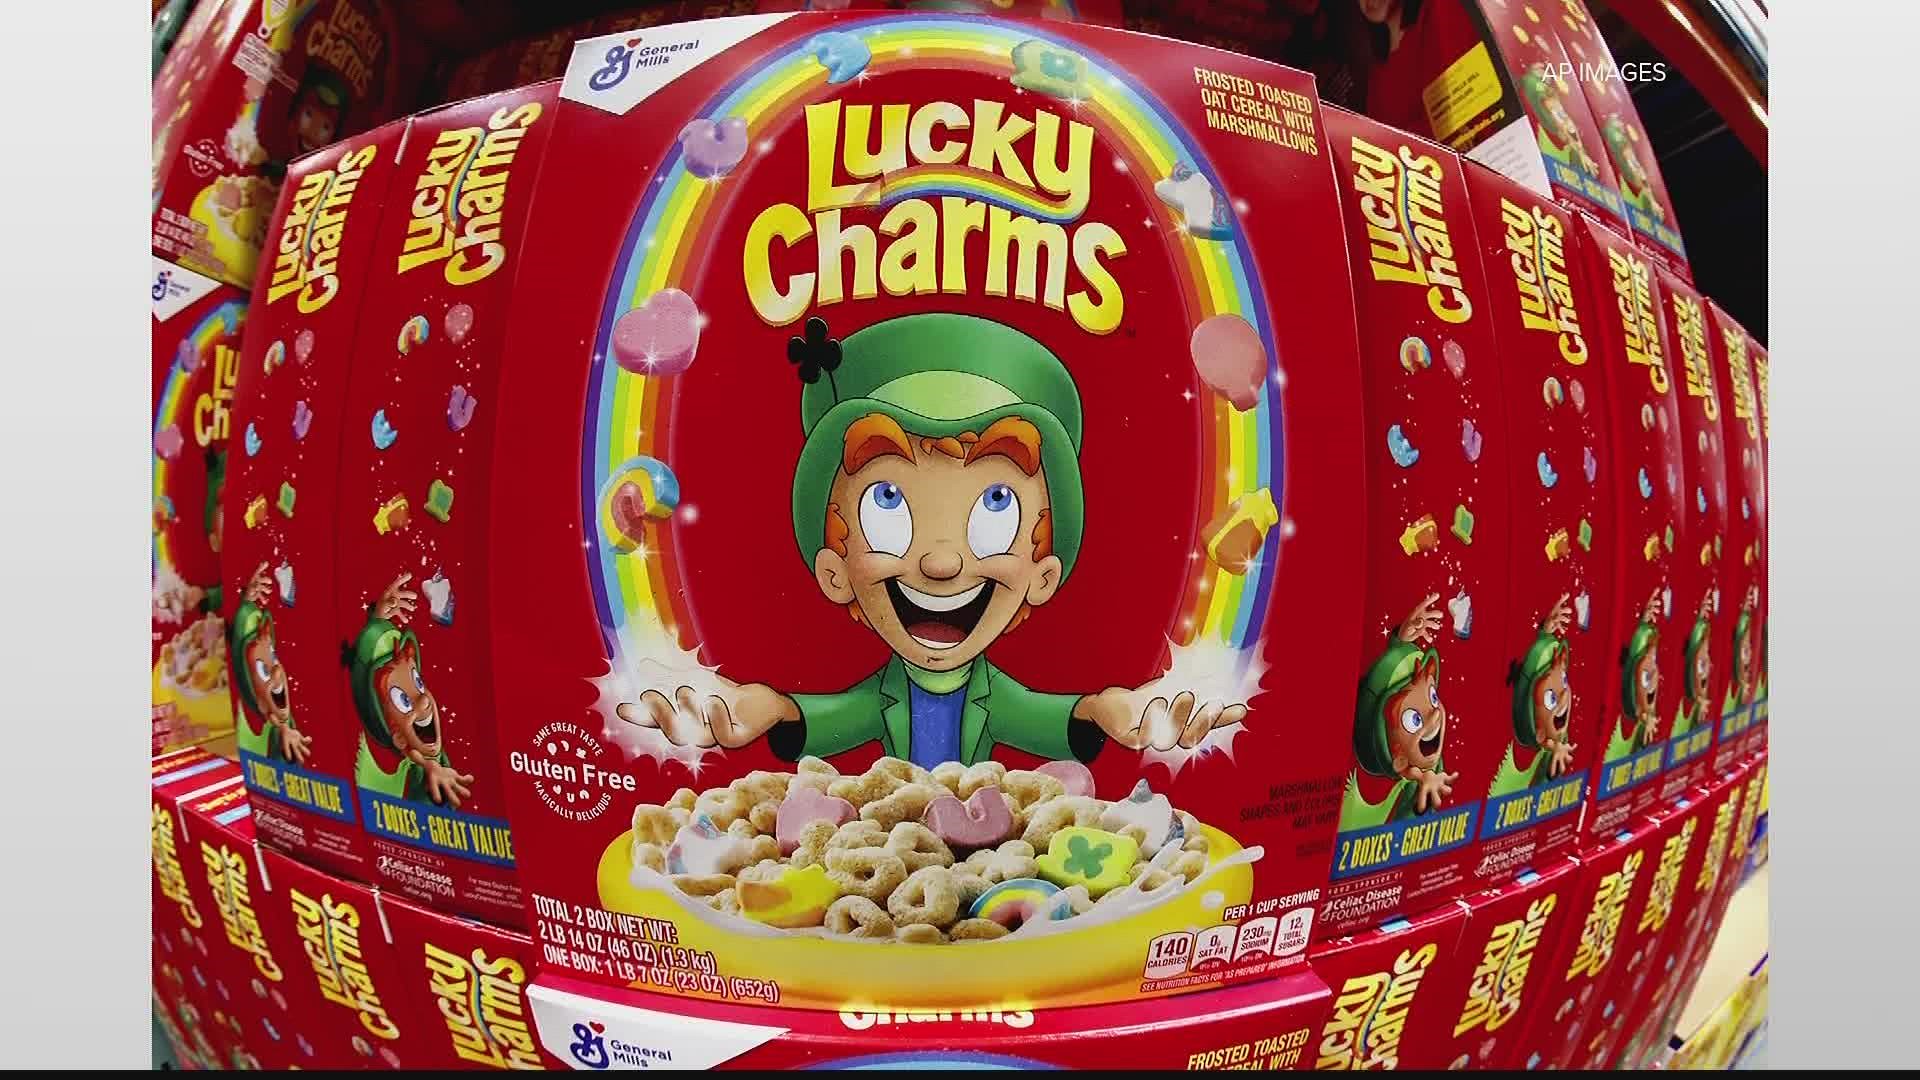 The U.S. Food and Drug Administration is investigating Lucky Charms cereal after dozens of consumers complained of illness after eating it.